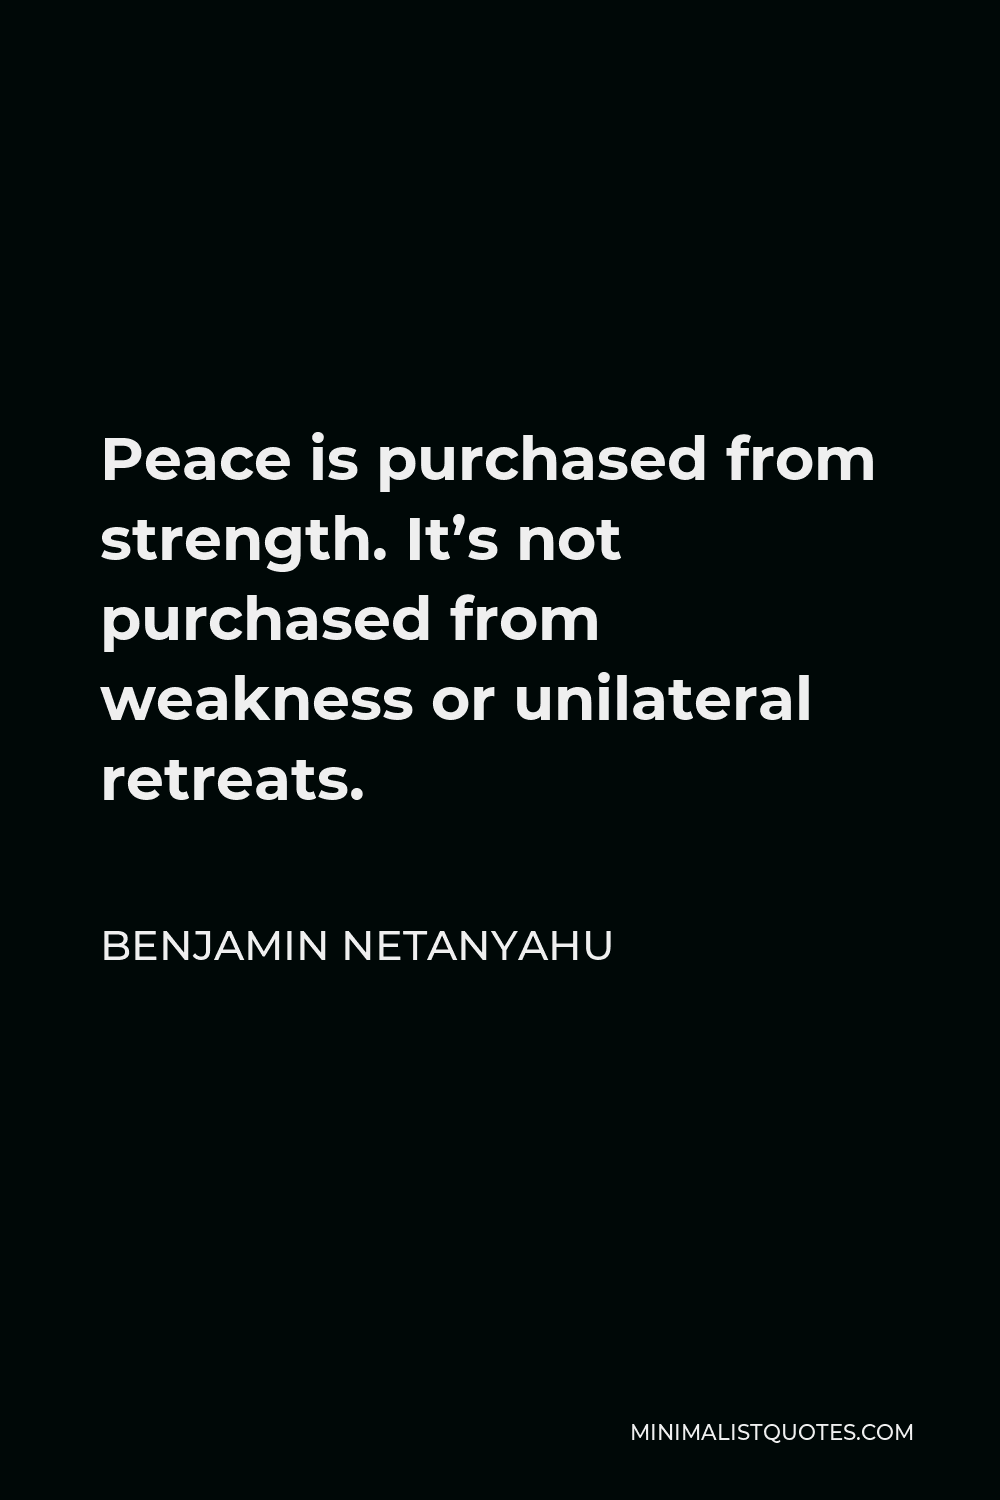 Benjamin Netanyahu Quote - Peace is purchased from strength. It’s not purchased from weakness or unilateral retreats.